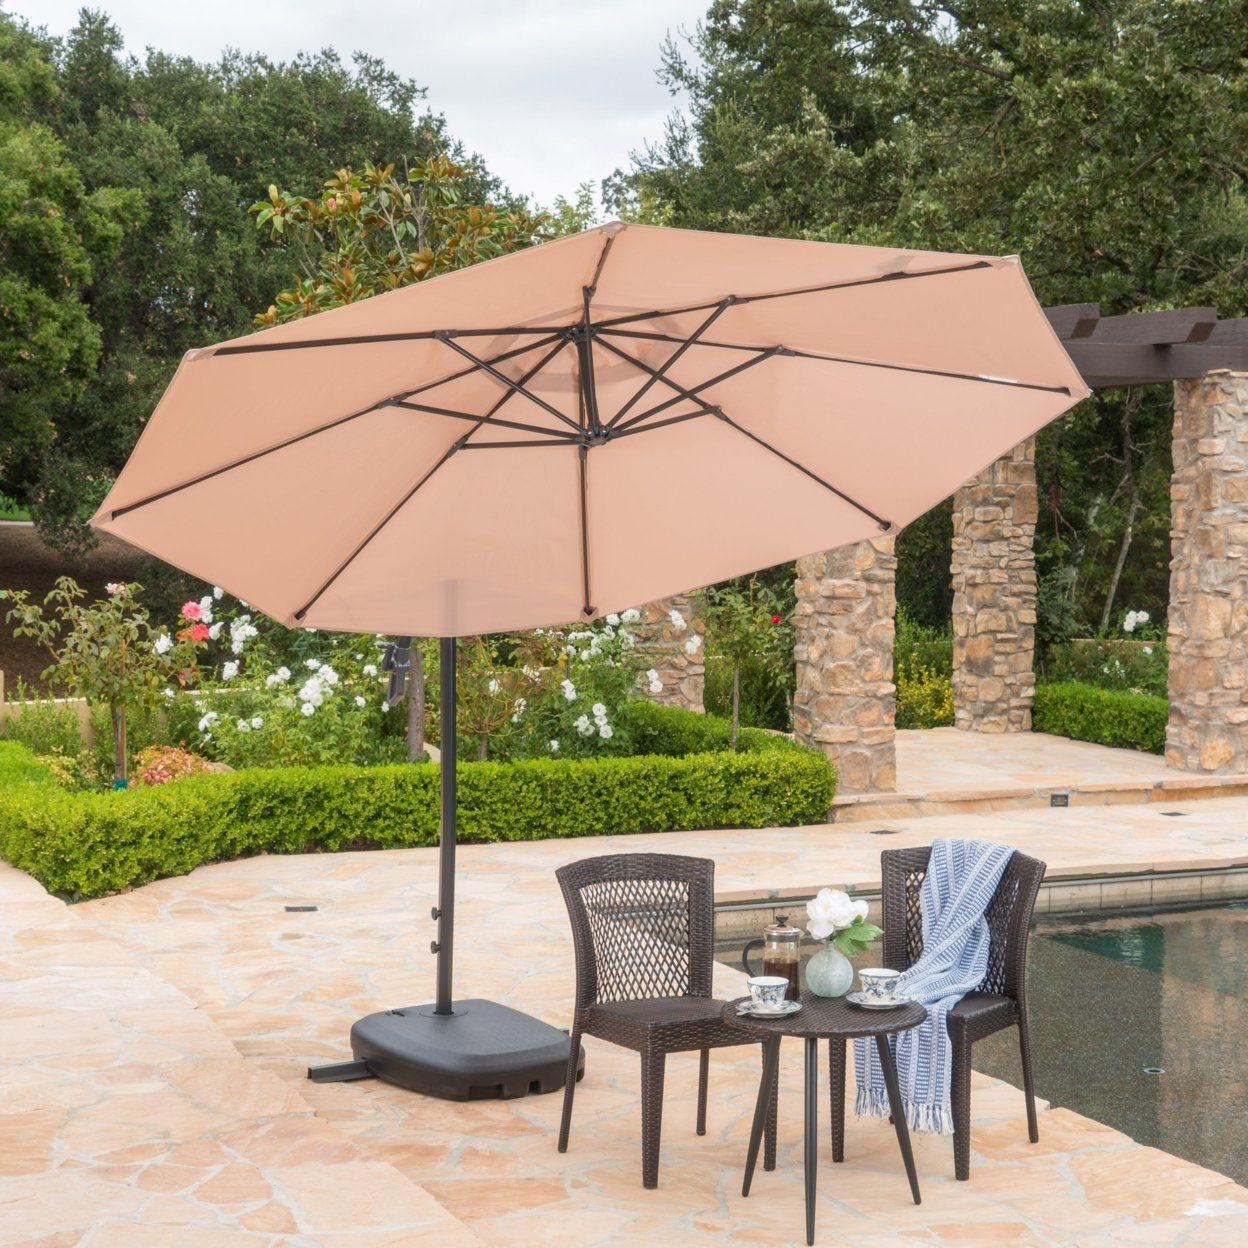 Sahara Outdoor Water Resistant Canopy With Plastic Base Aluminum Pole - Sand